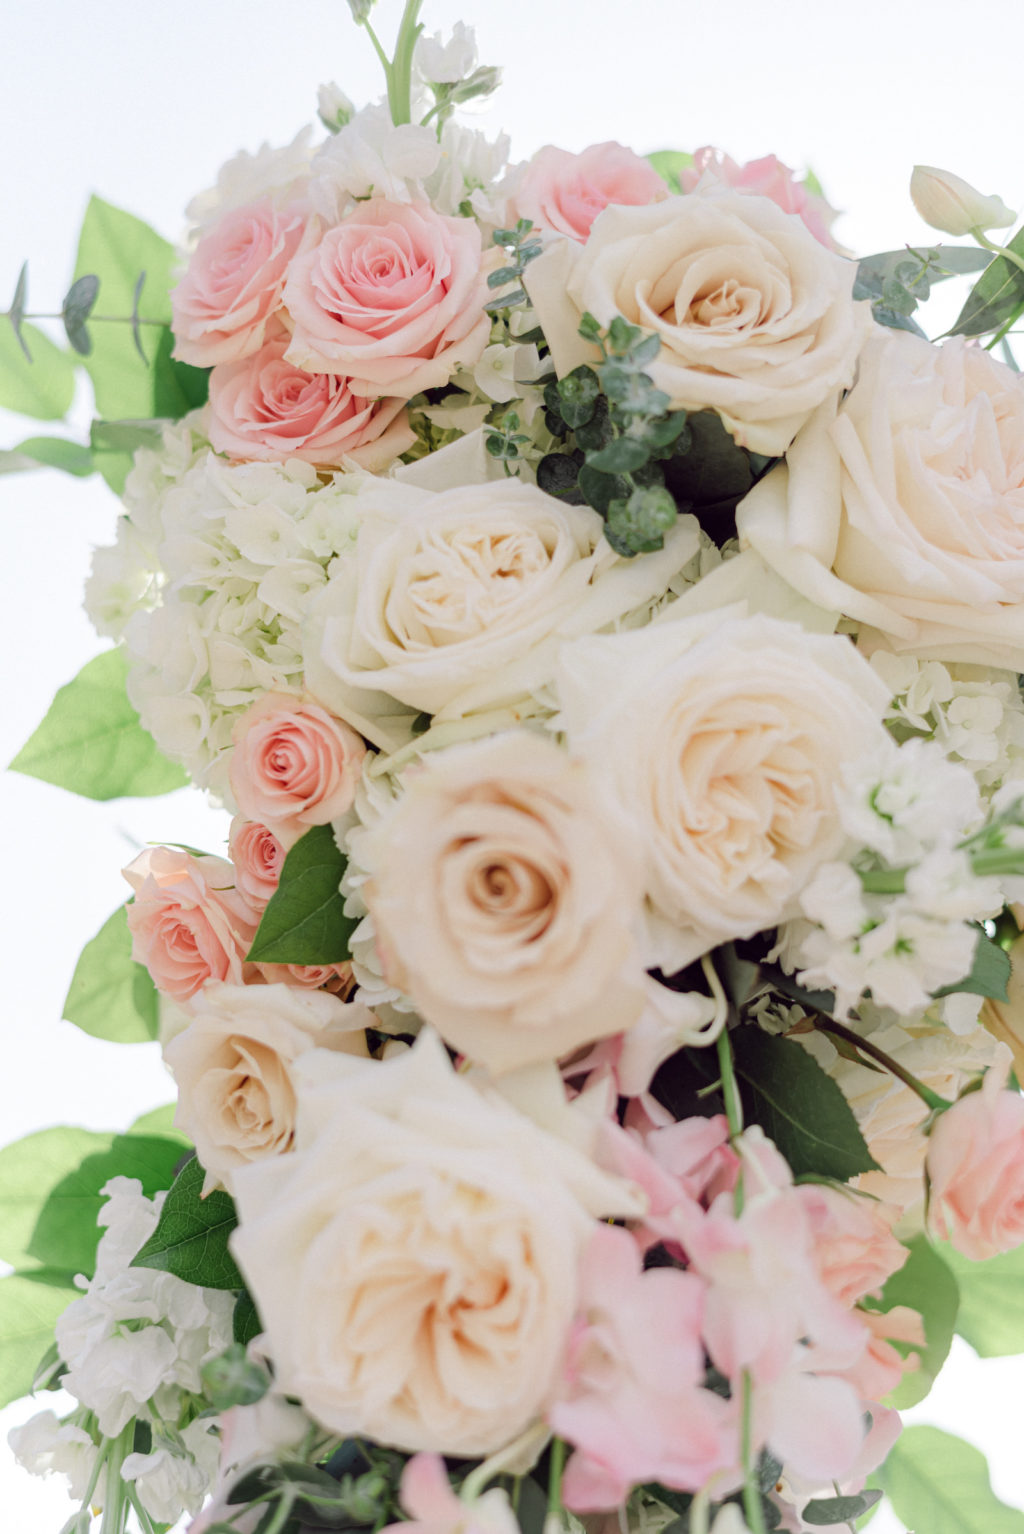 Romantic Classic Wedding Florals, Ivory and Blush Pink Roses, Greenery Leaves